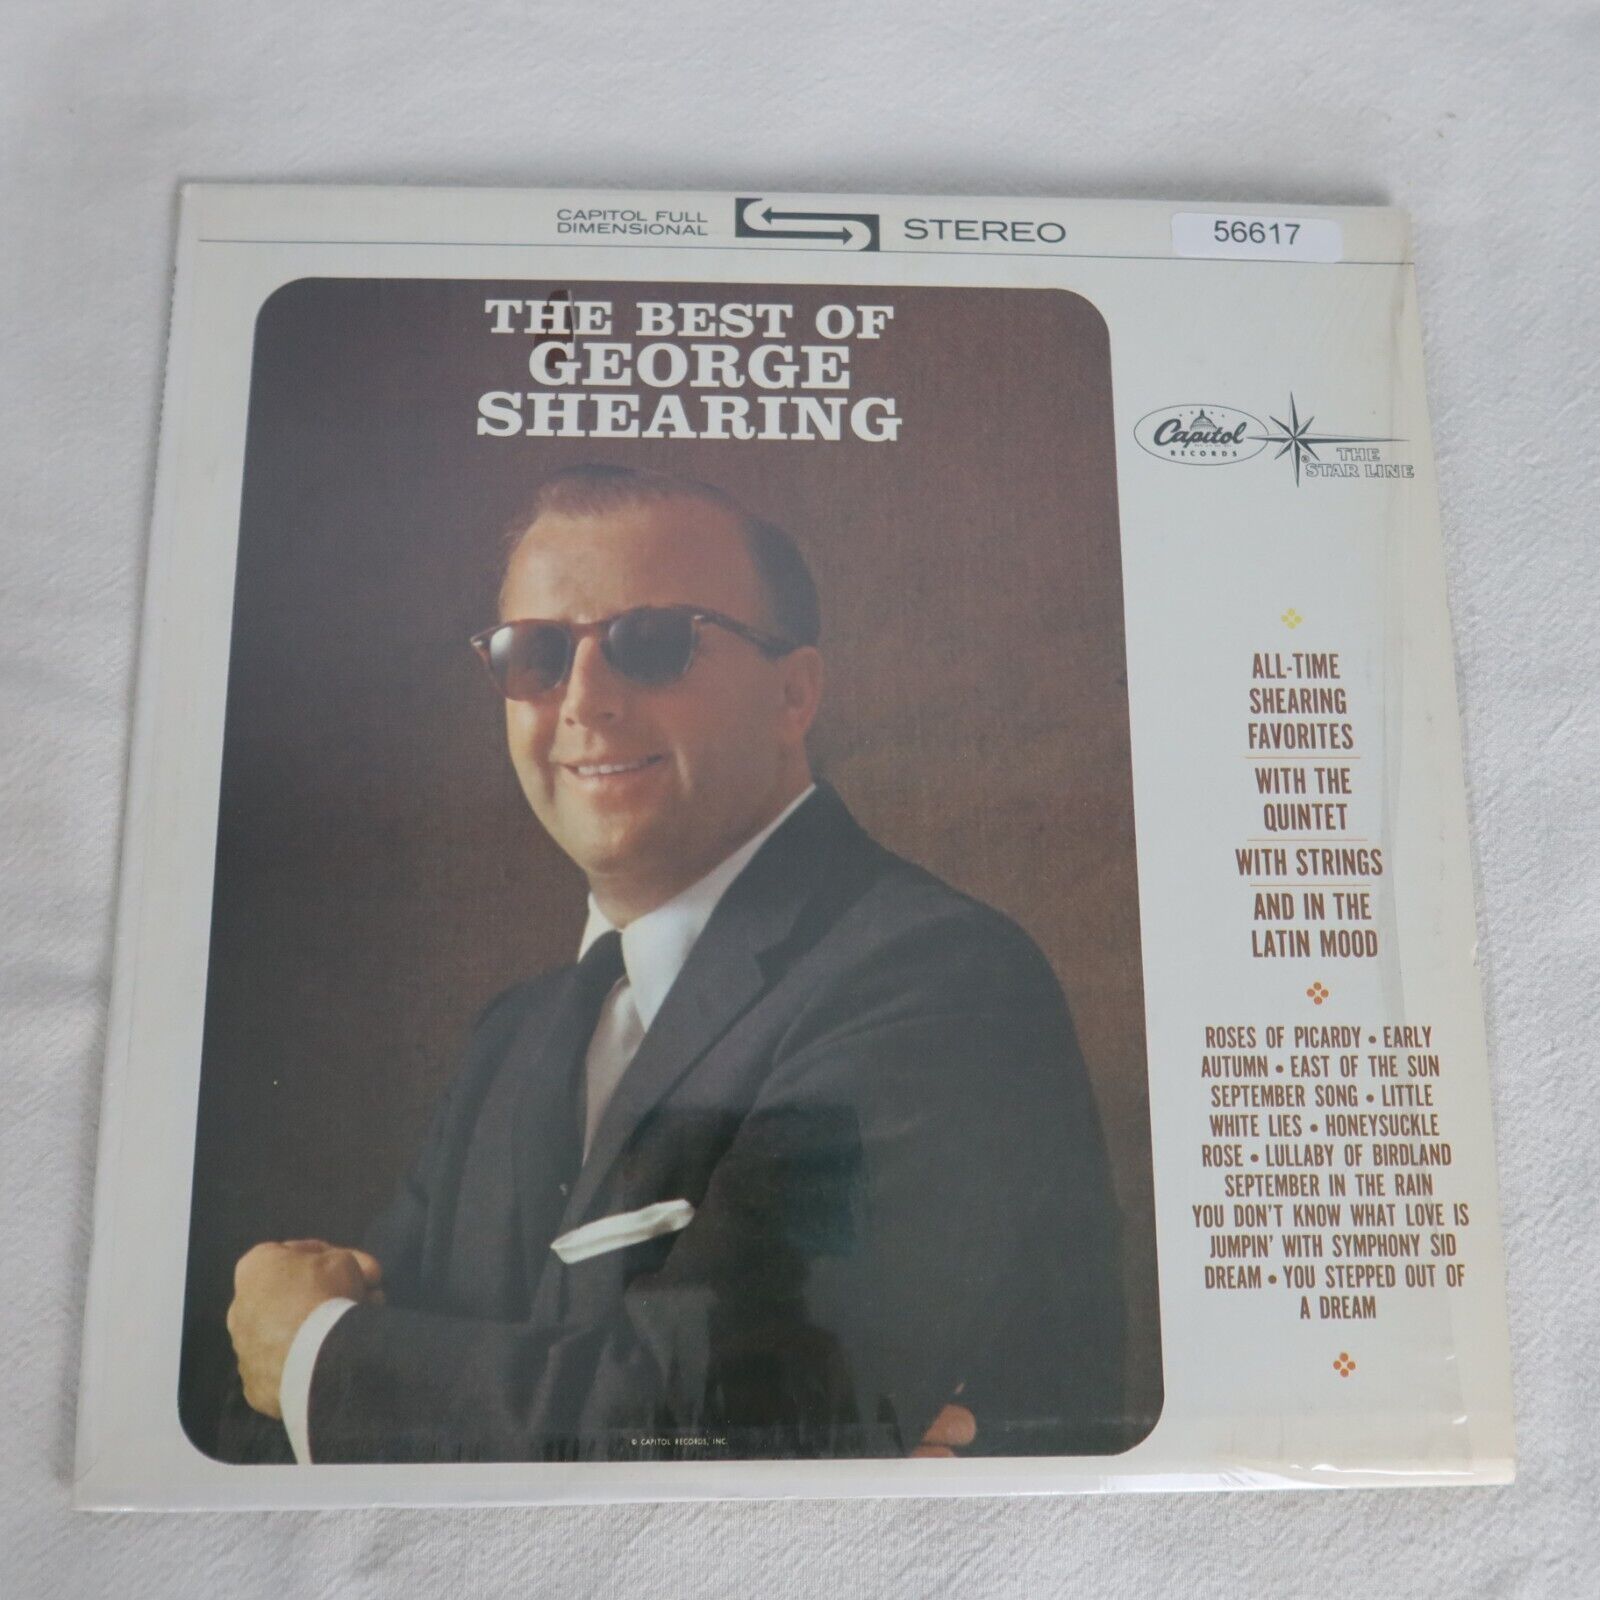 NEW George Shearing The Best Of w/ Shrink LP Vinyl Record Album